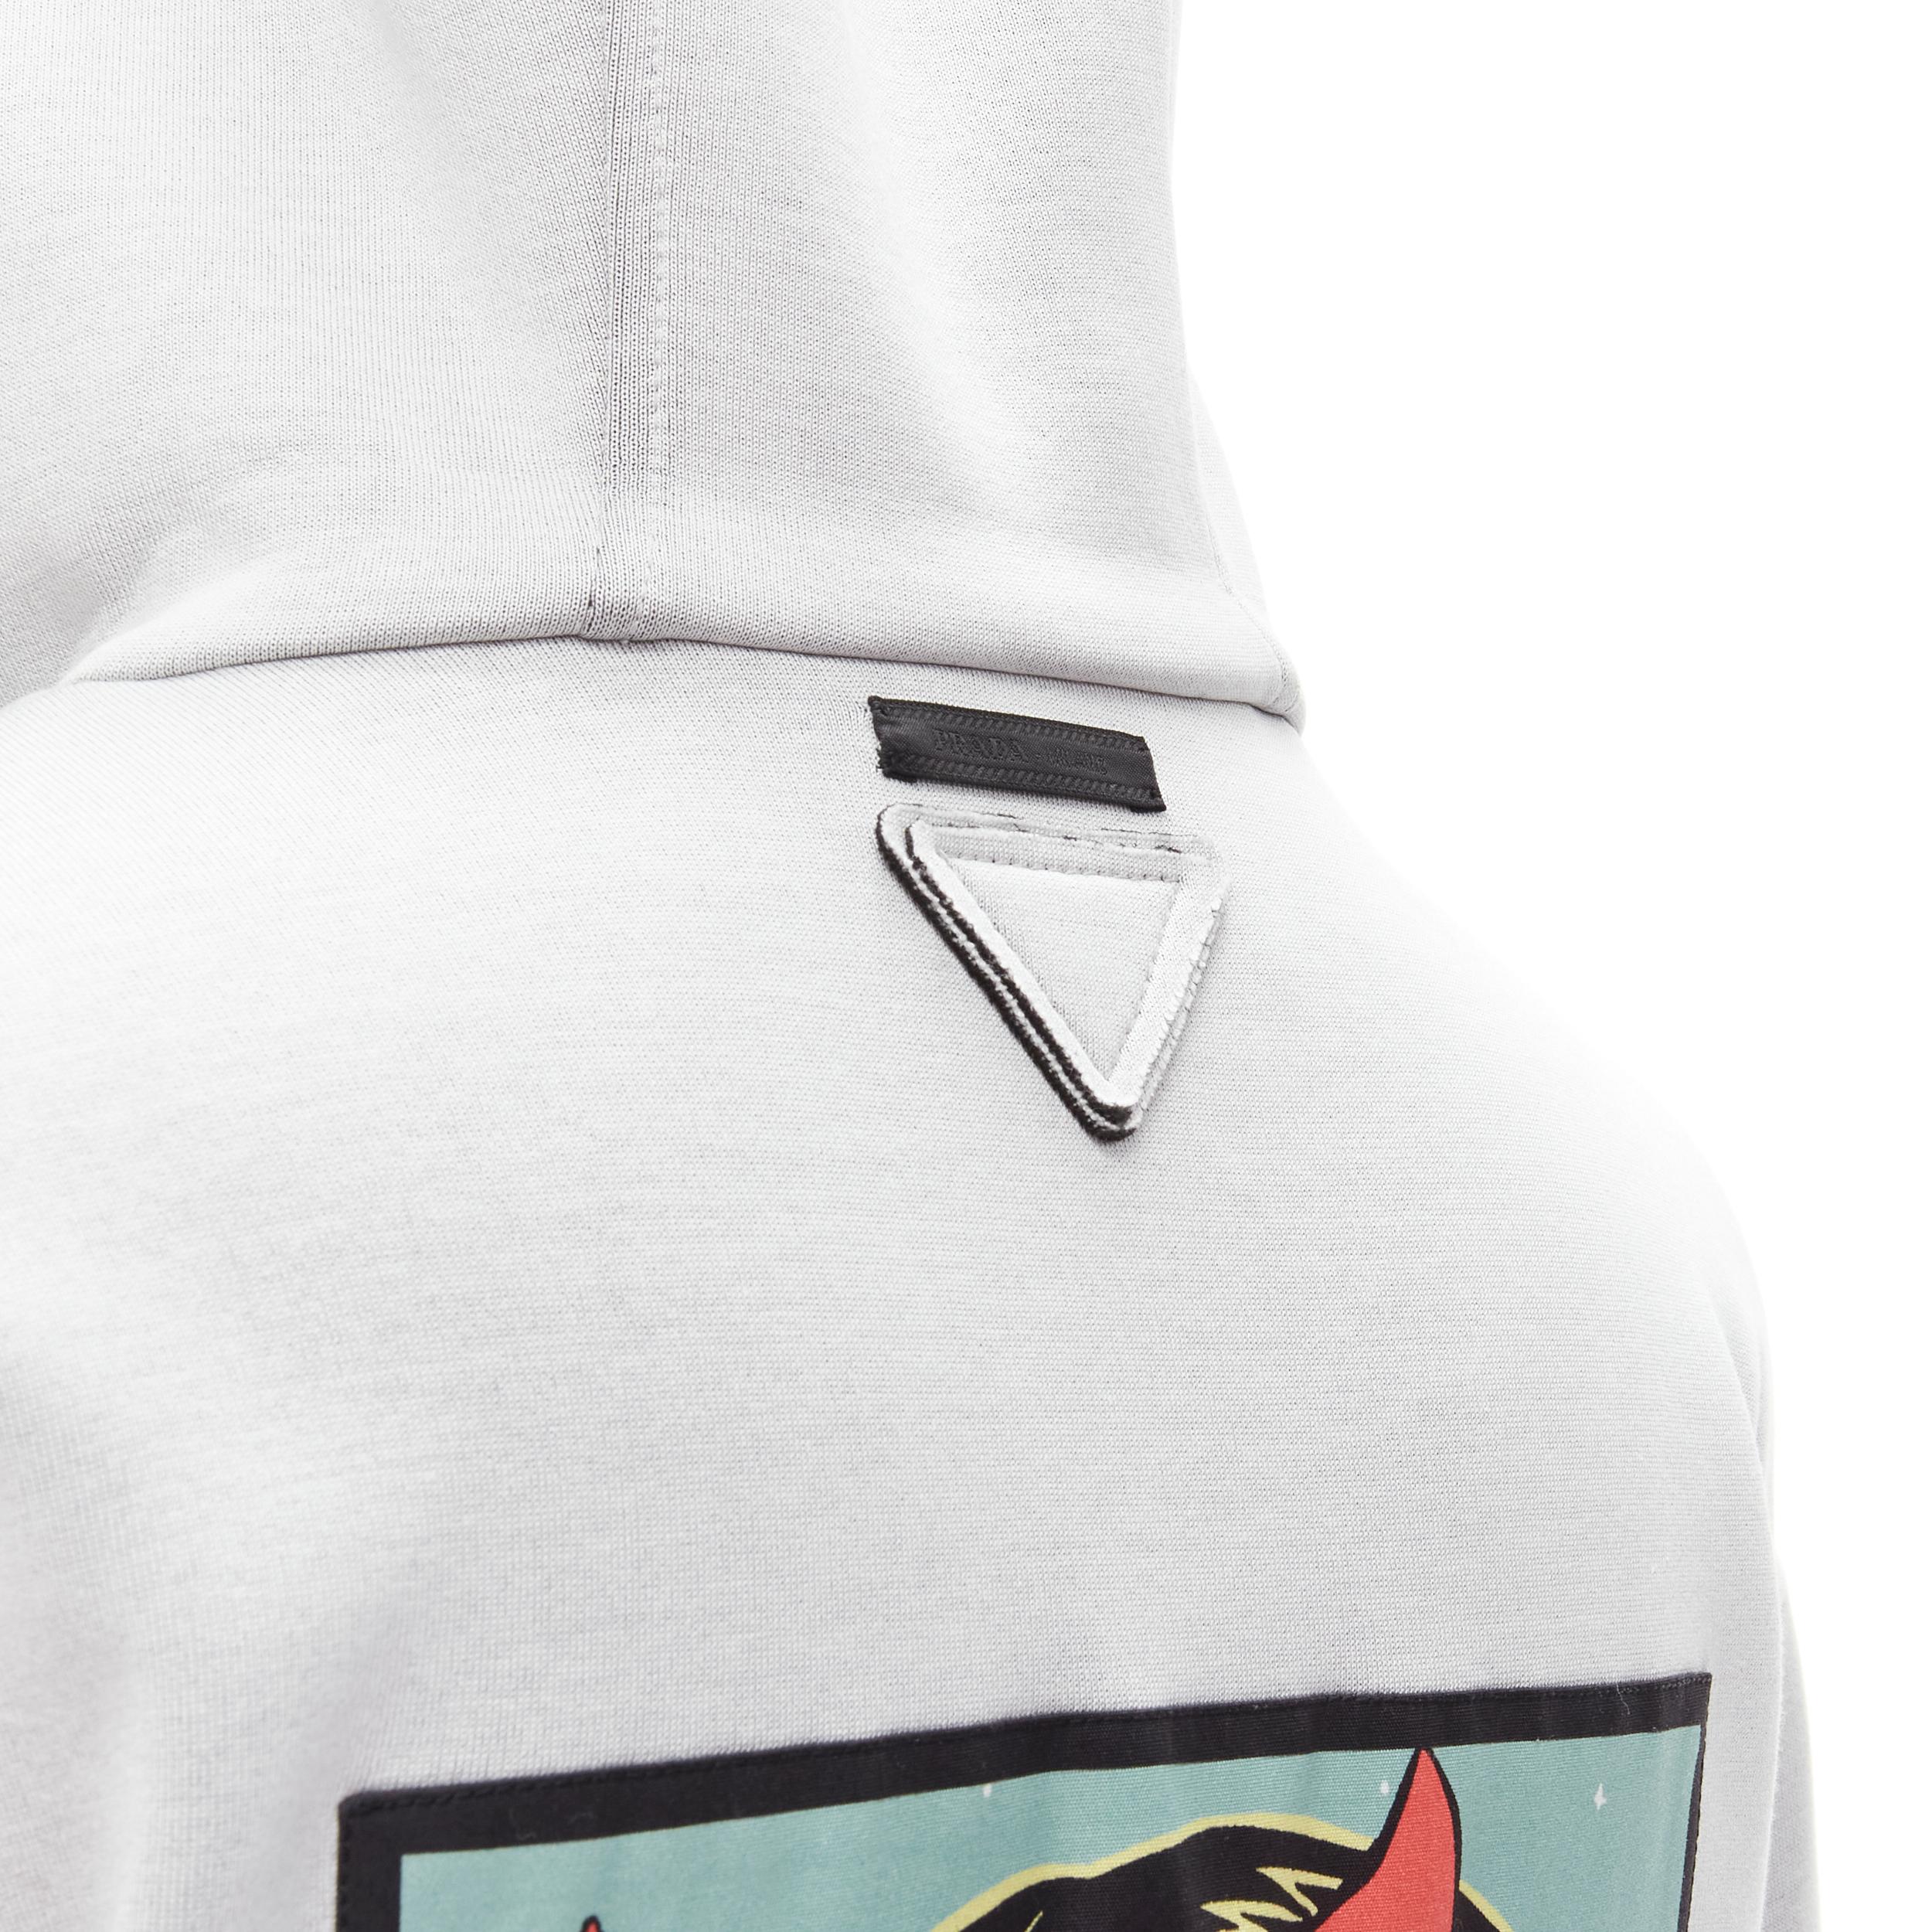 PRADA 2018 Girls Invented comic print grey cotton zip up hoodie S 
Reference: ANWU/A00477 
Brand: Prada 
Designer: Miuccia Prada 
Collection: 2018 Girls Invented 
Material: Cotton 
Color: Grey 
Pattern: Solid 
Closure: Zip 
Extra Detail: Zip front